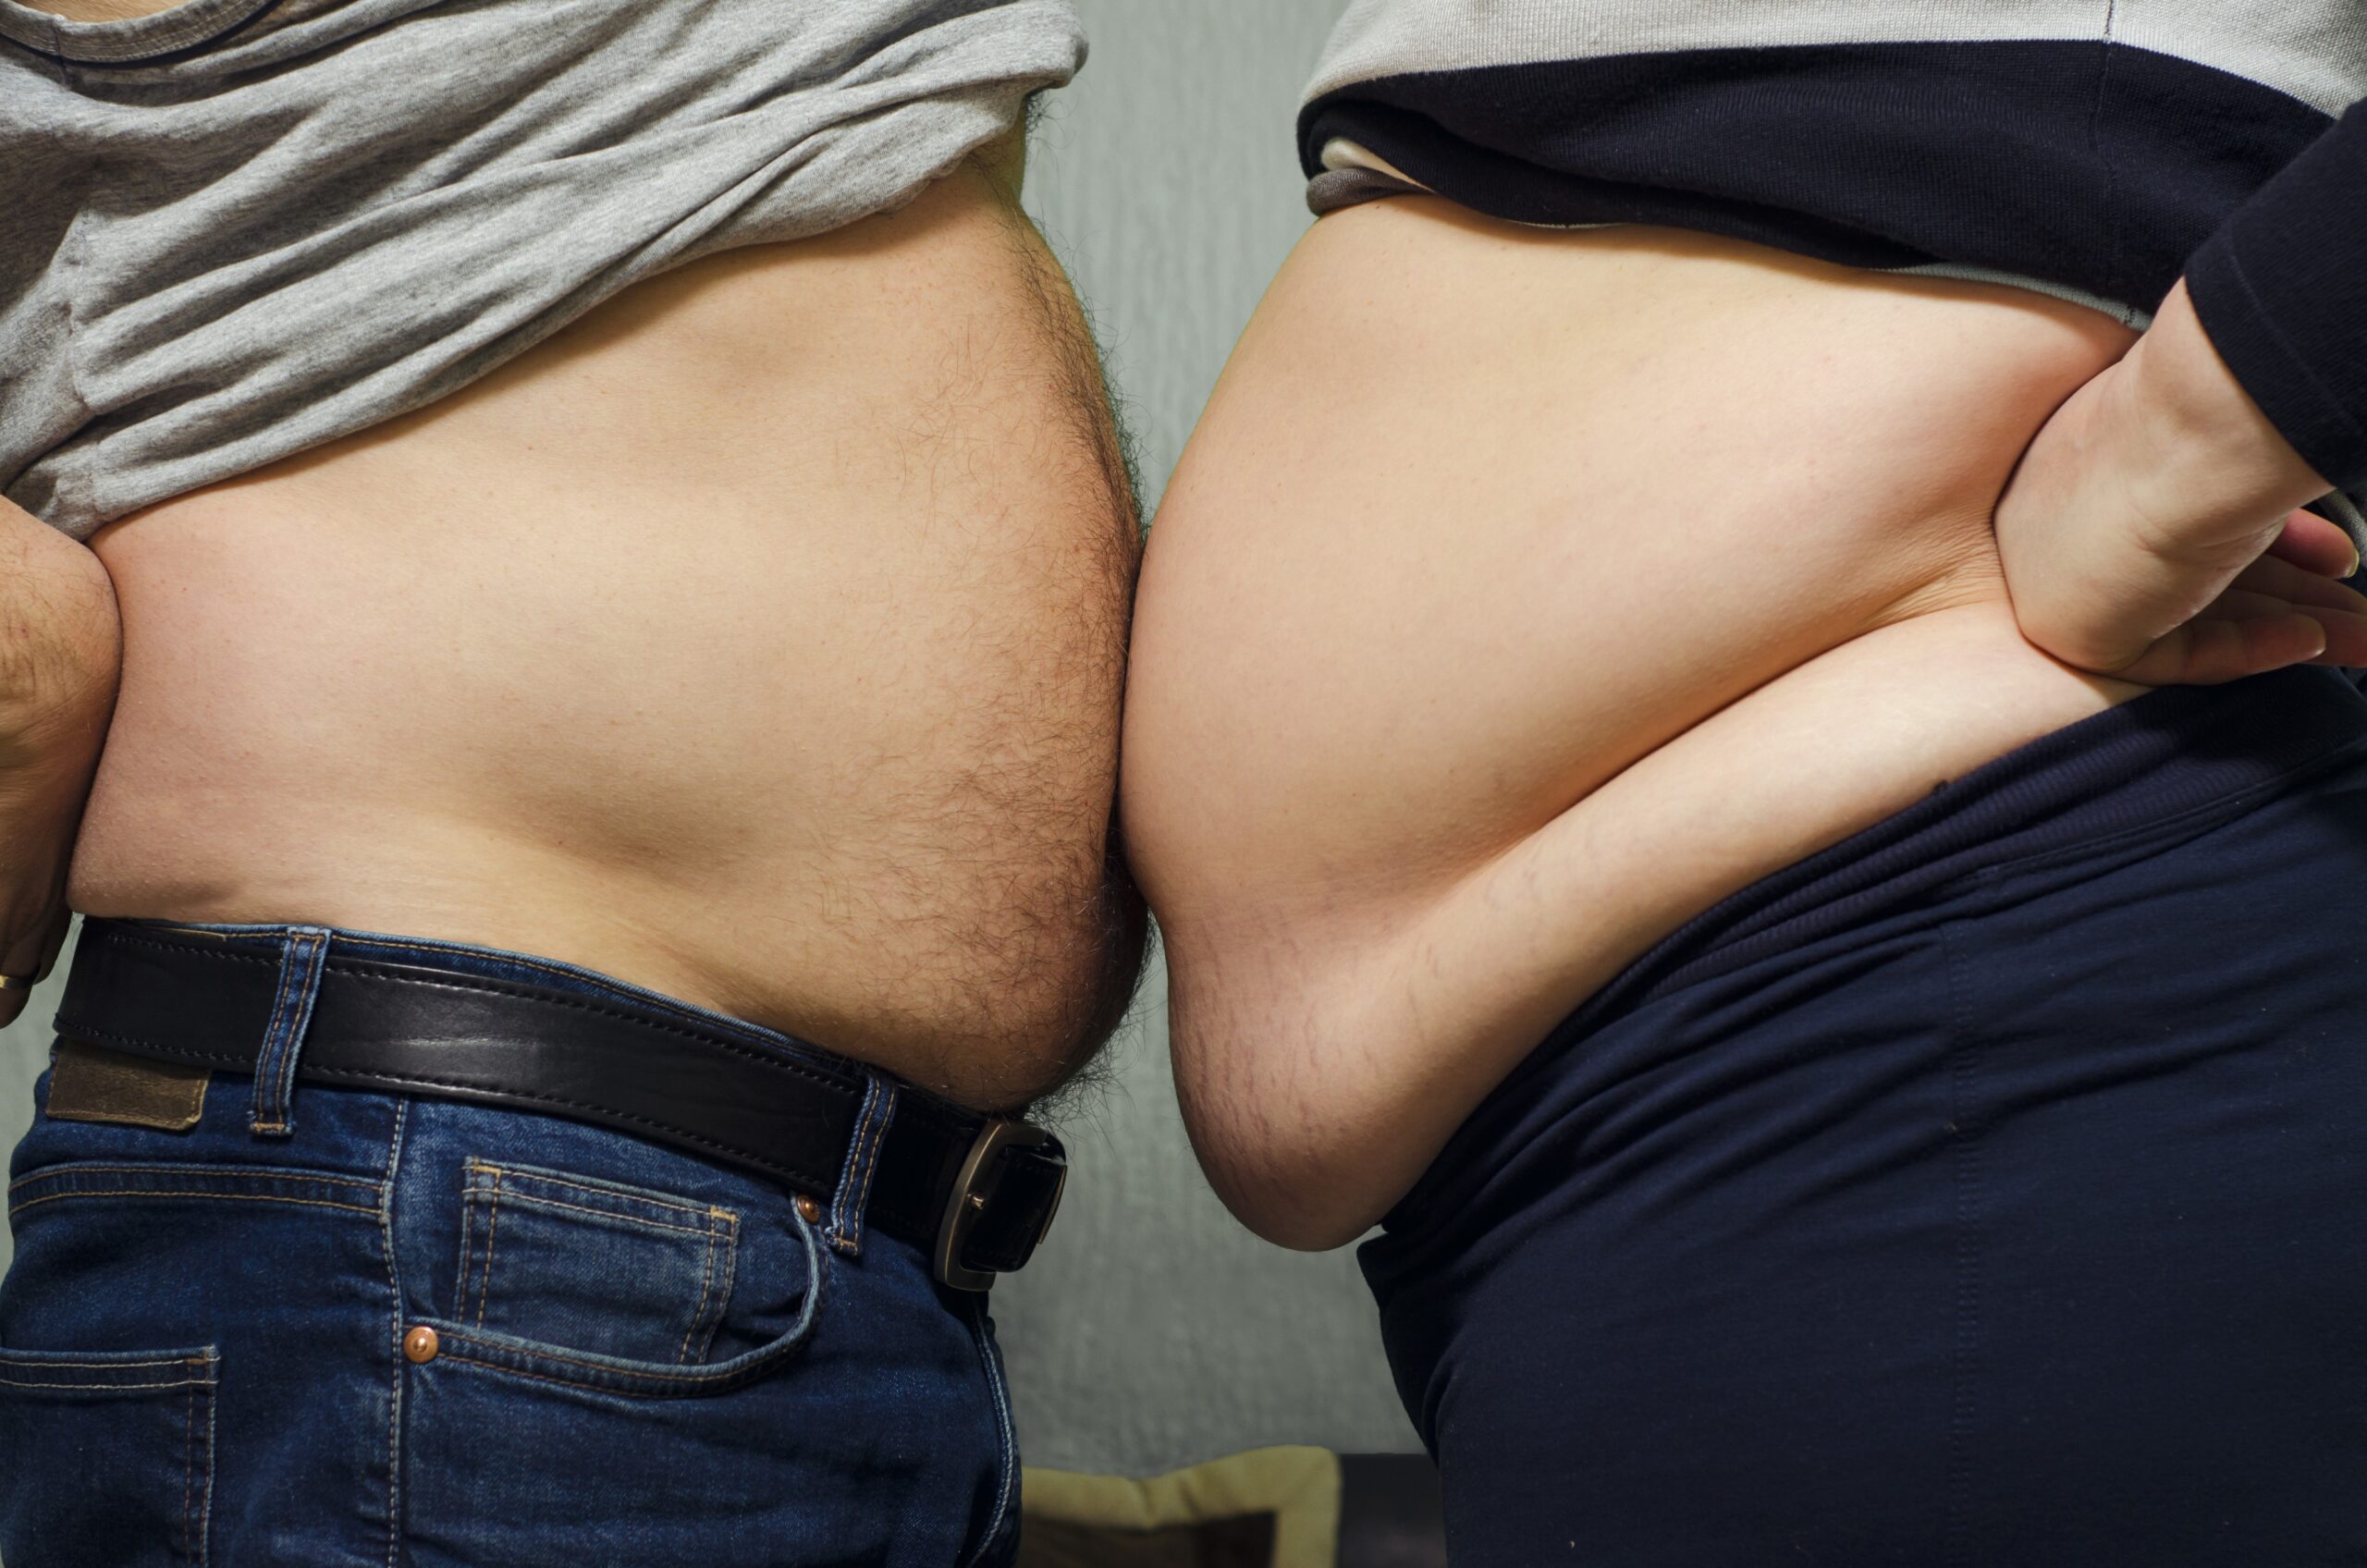 The FDA Has Approved An Obesity Drug That Helped Some People Drop Weight By 15%